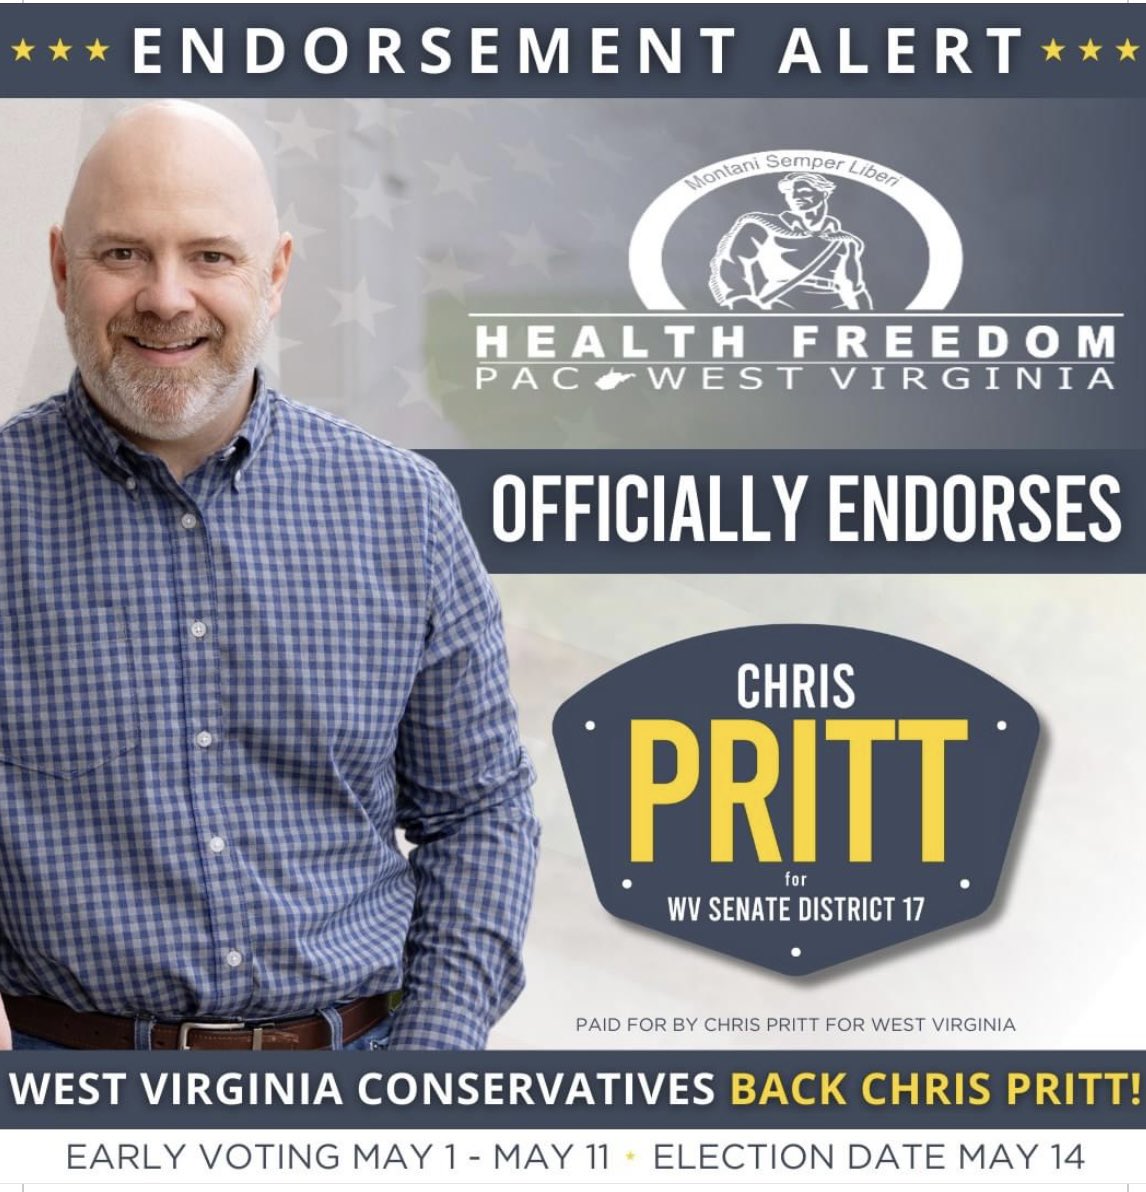 Proud to announce the Health Freedom PAC of WV has officially endorsed my candidacy for State Senate! I stand firm in my belief that individuals should have the autonomy to make their own health choices, free from government interference. #wvpol